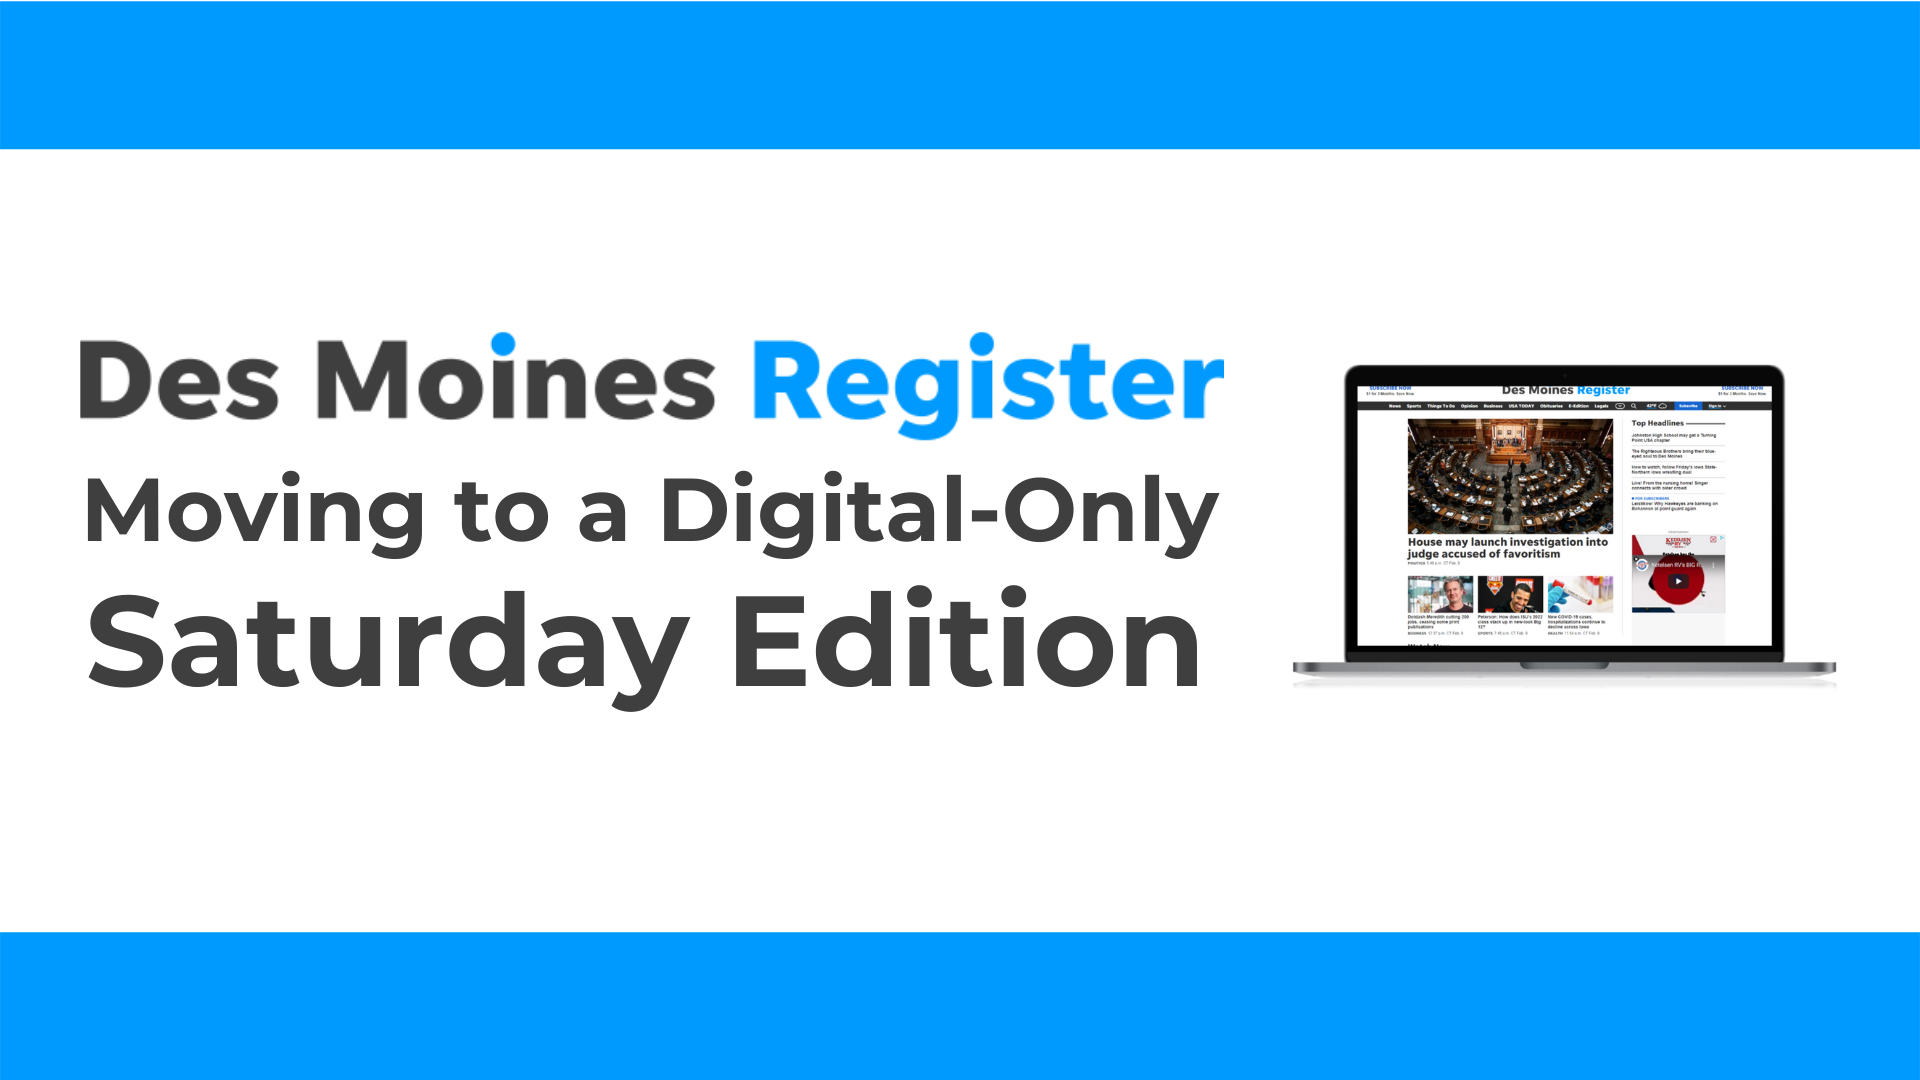 Des Moines Register Moving to a DigitalOnly Saturday Edition on March